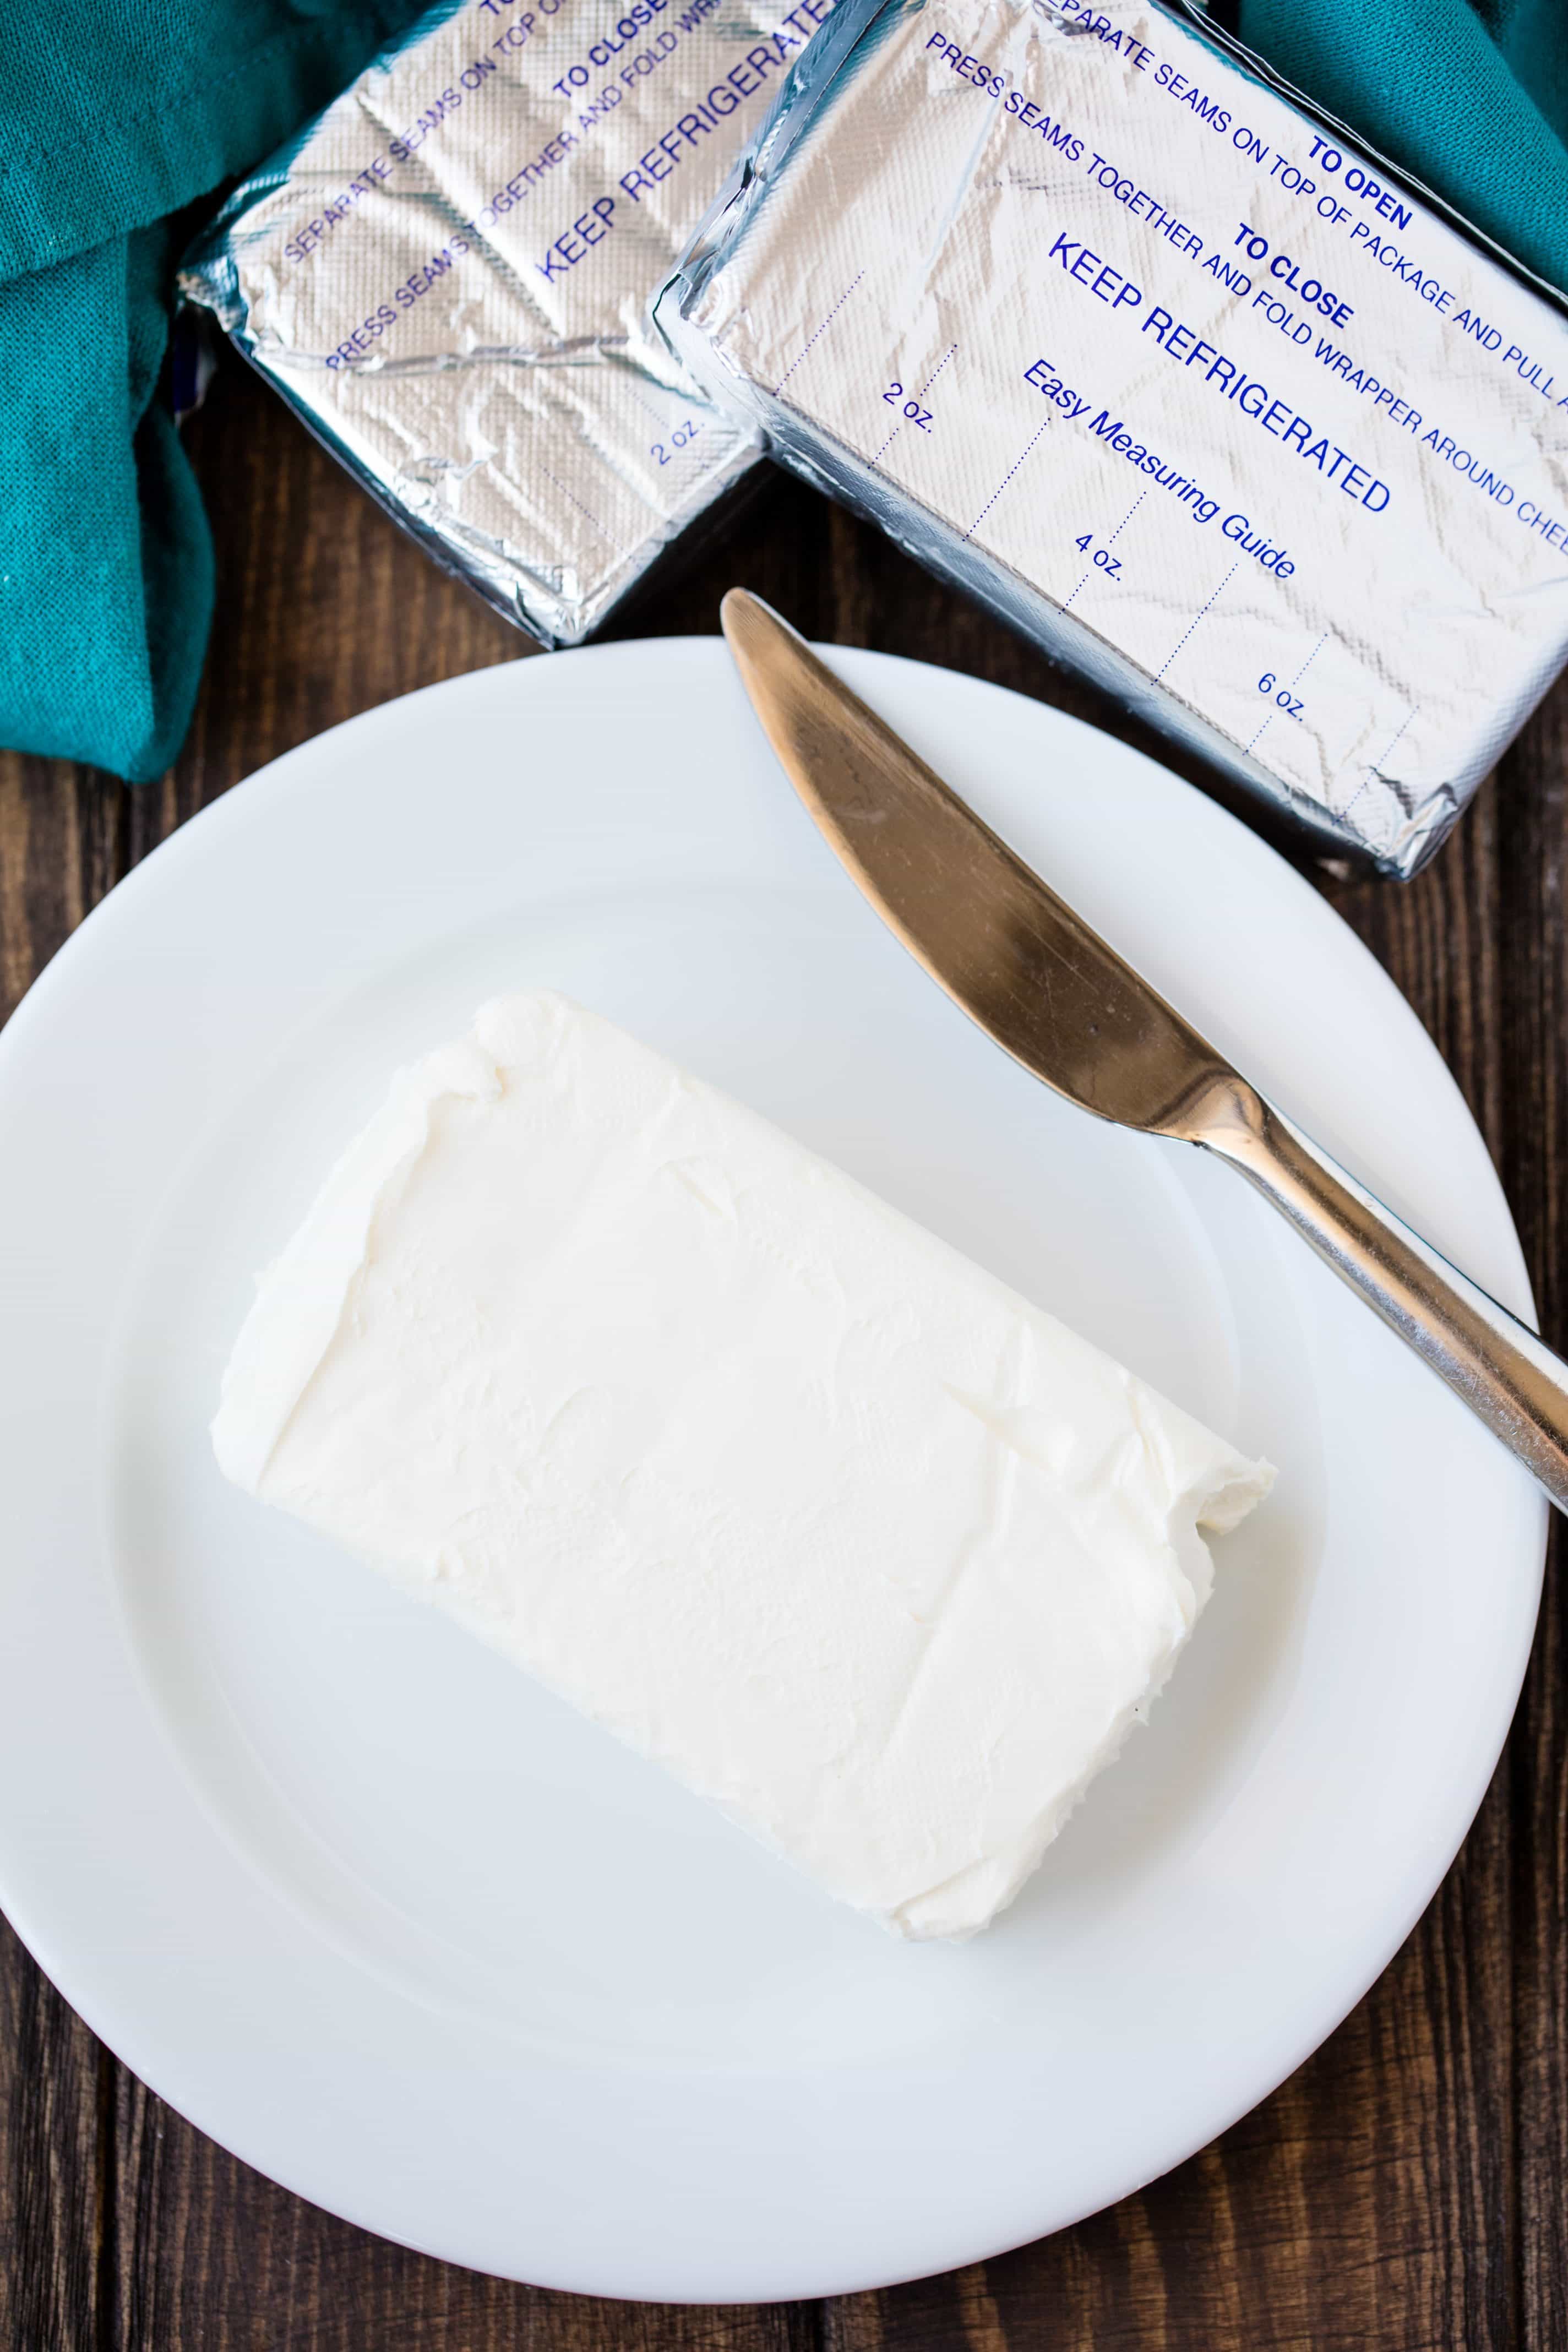 Learn how to soften cream cheese fast for use in recipes calling for softened cream cheese.